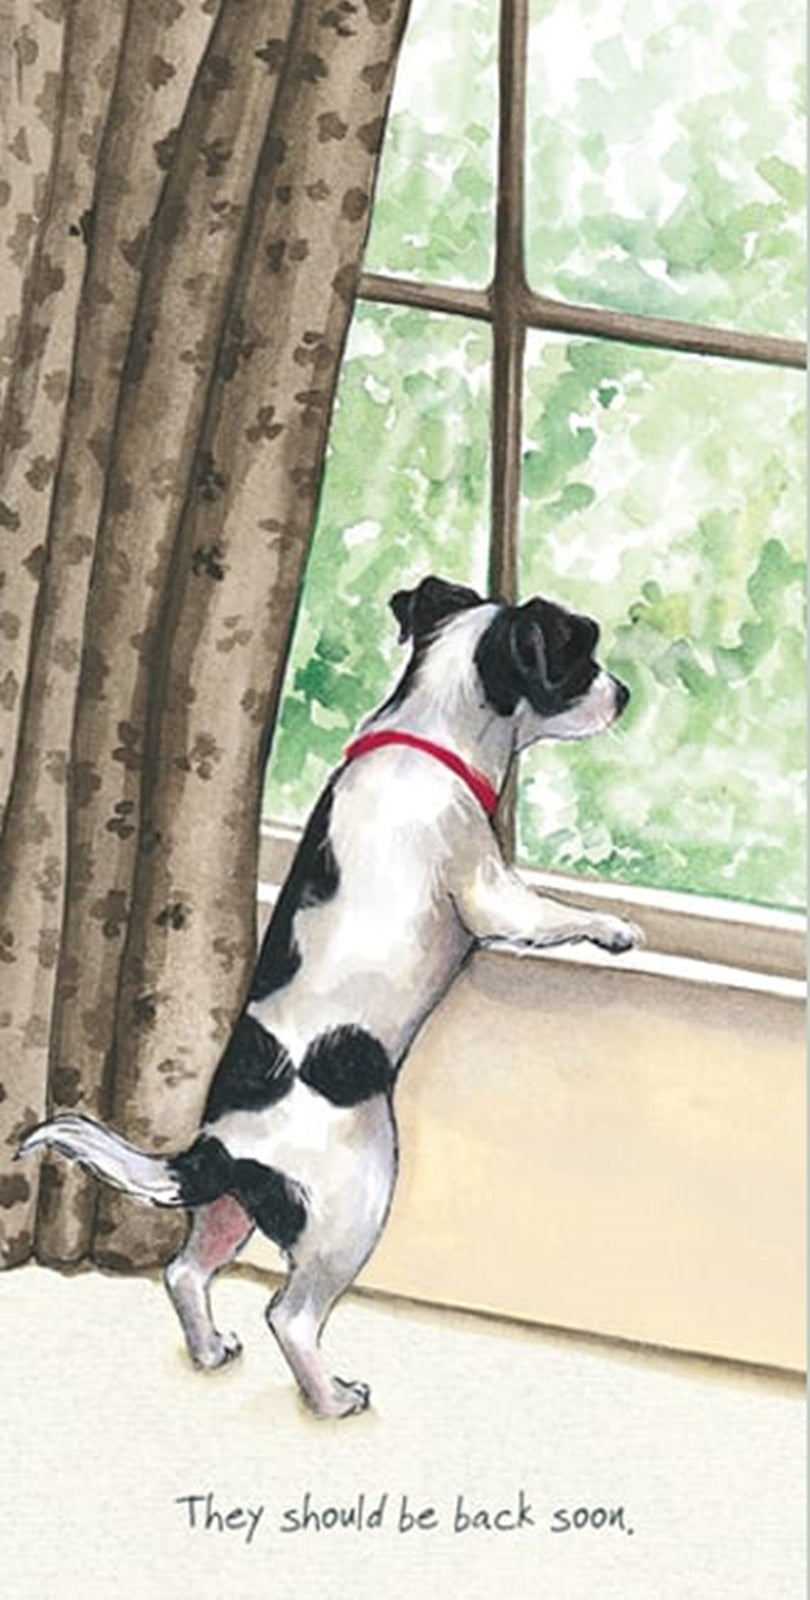 Jack Russell Greeting Card - Smiffy